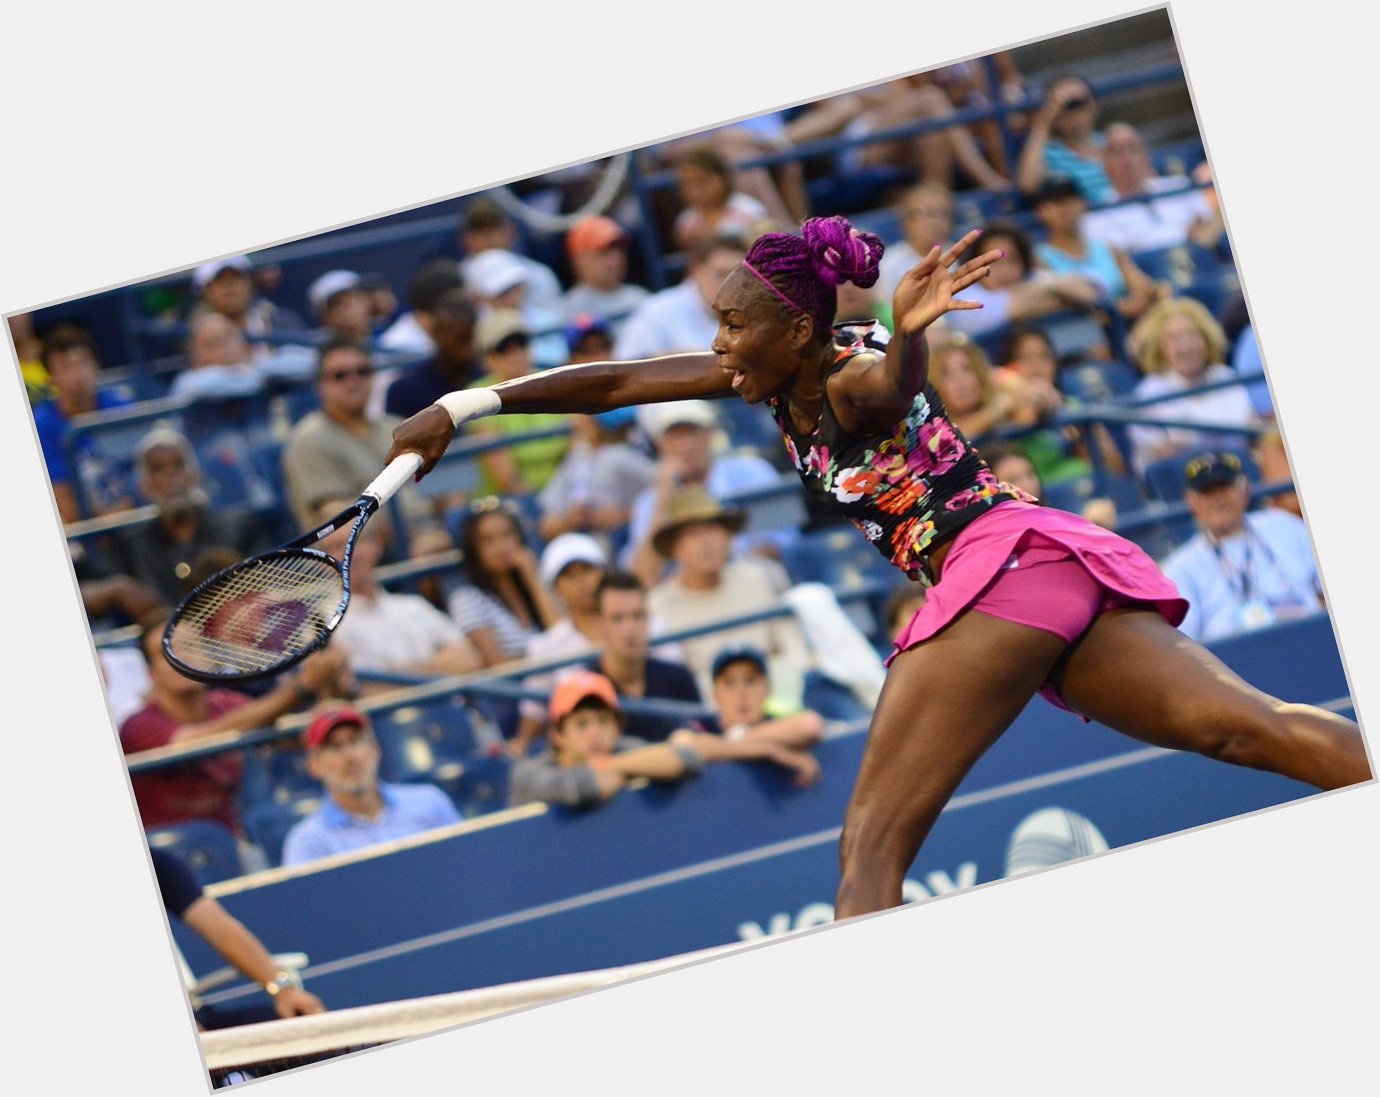 We would like to wish a happy 35th birthday to former World No. 1 player Venus Williams! 